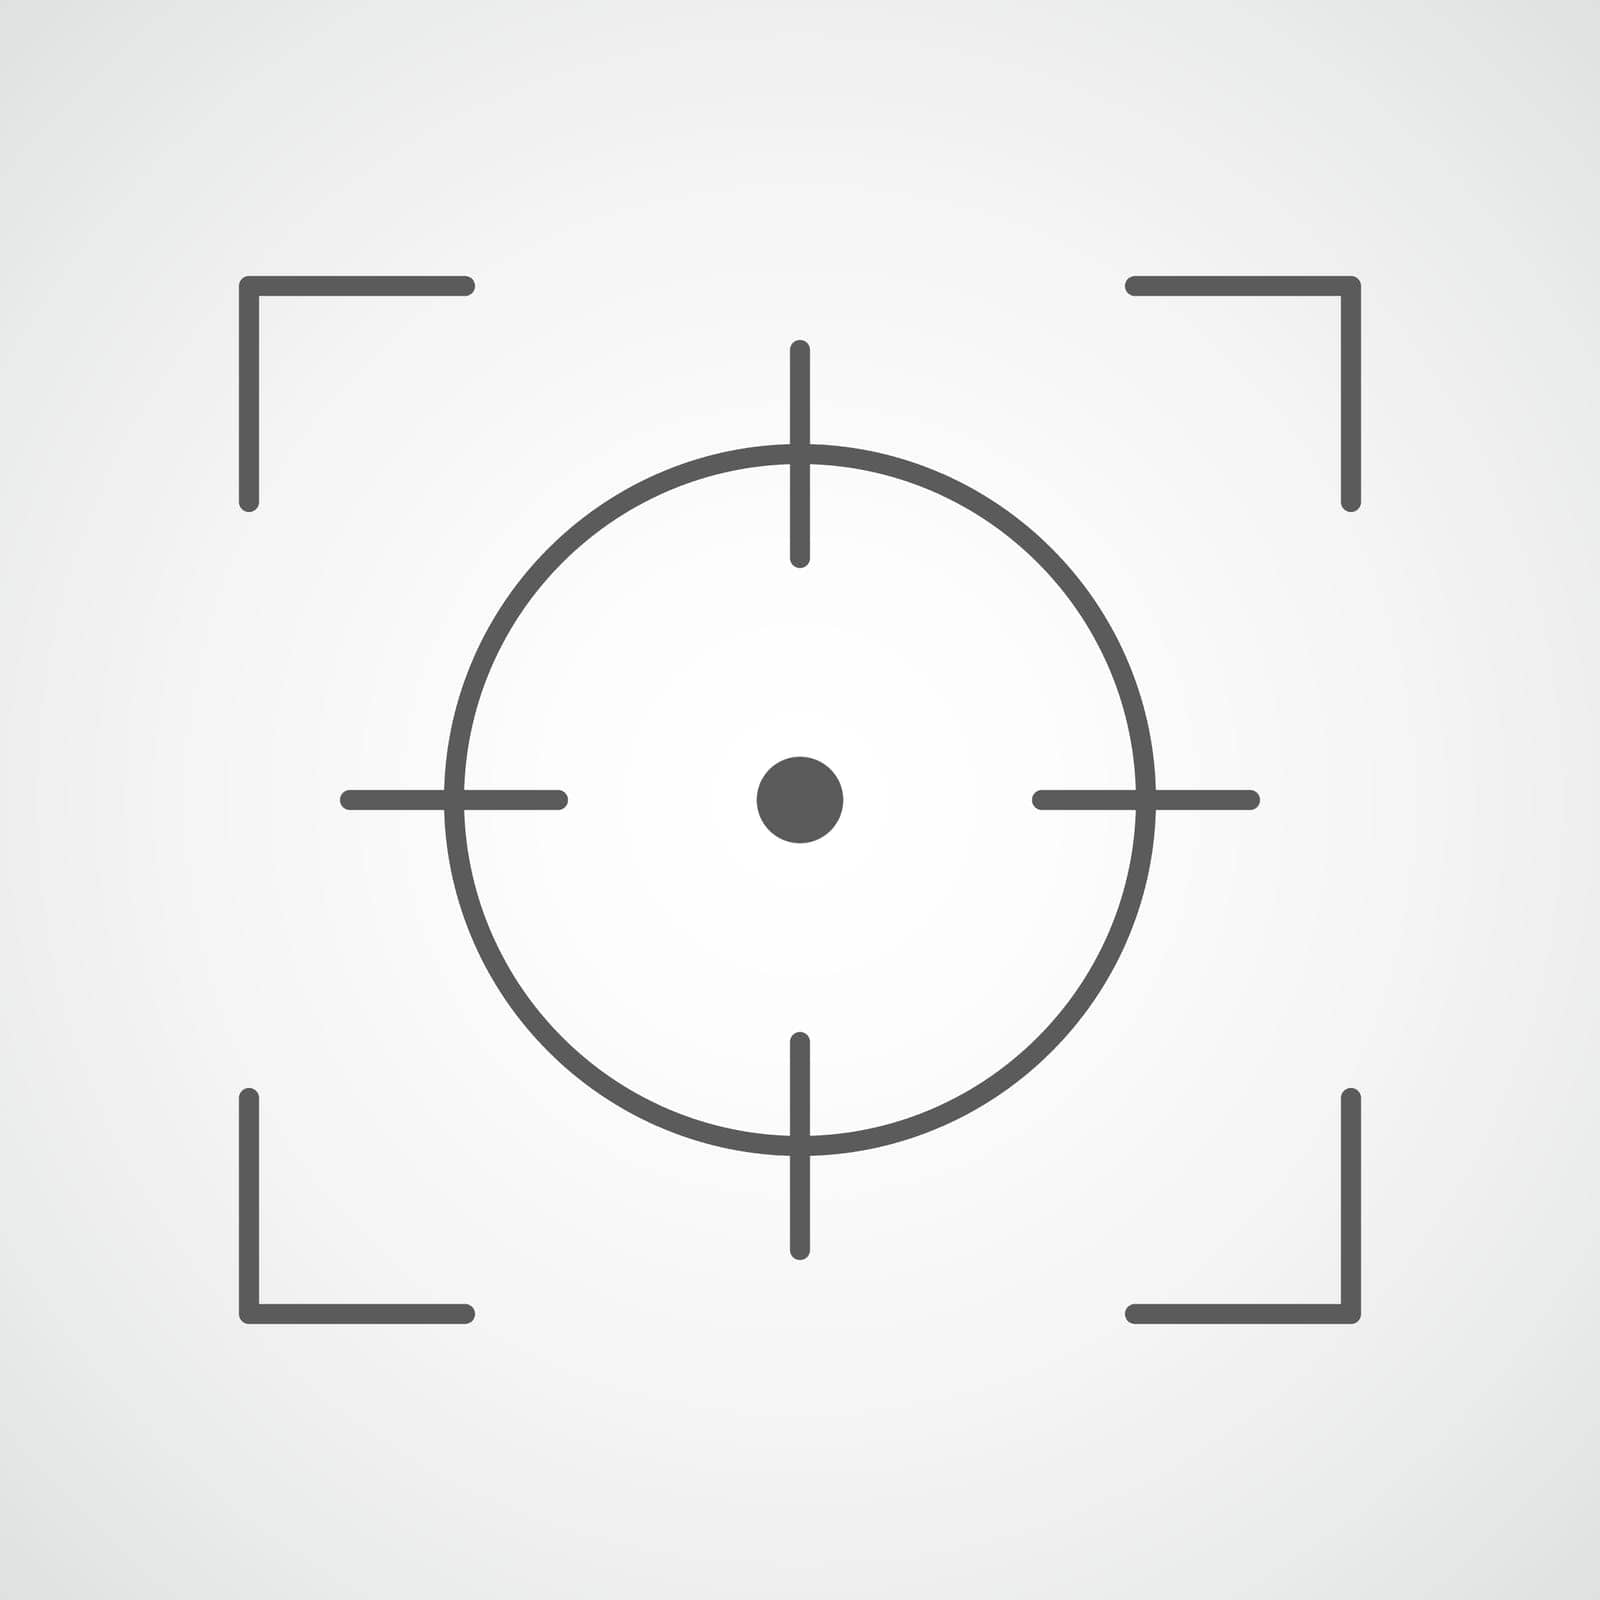 Target icon. Vector illustration. Aim icon. by Chekman